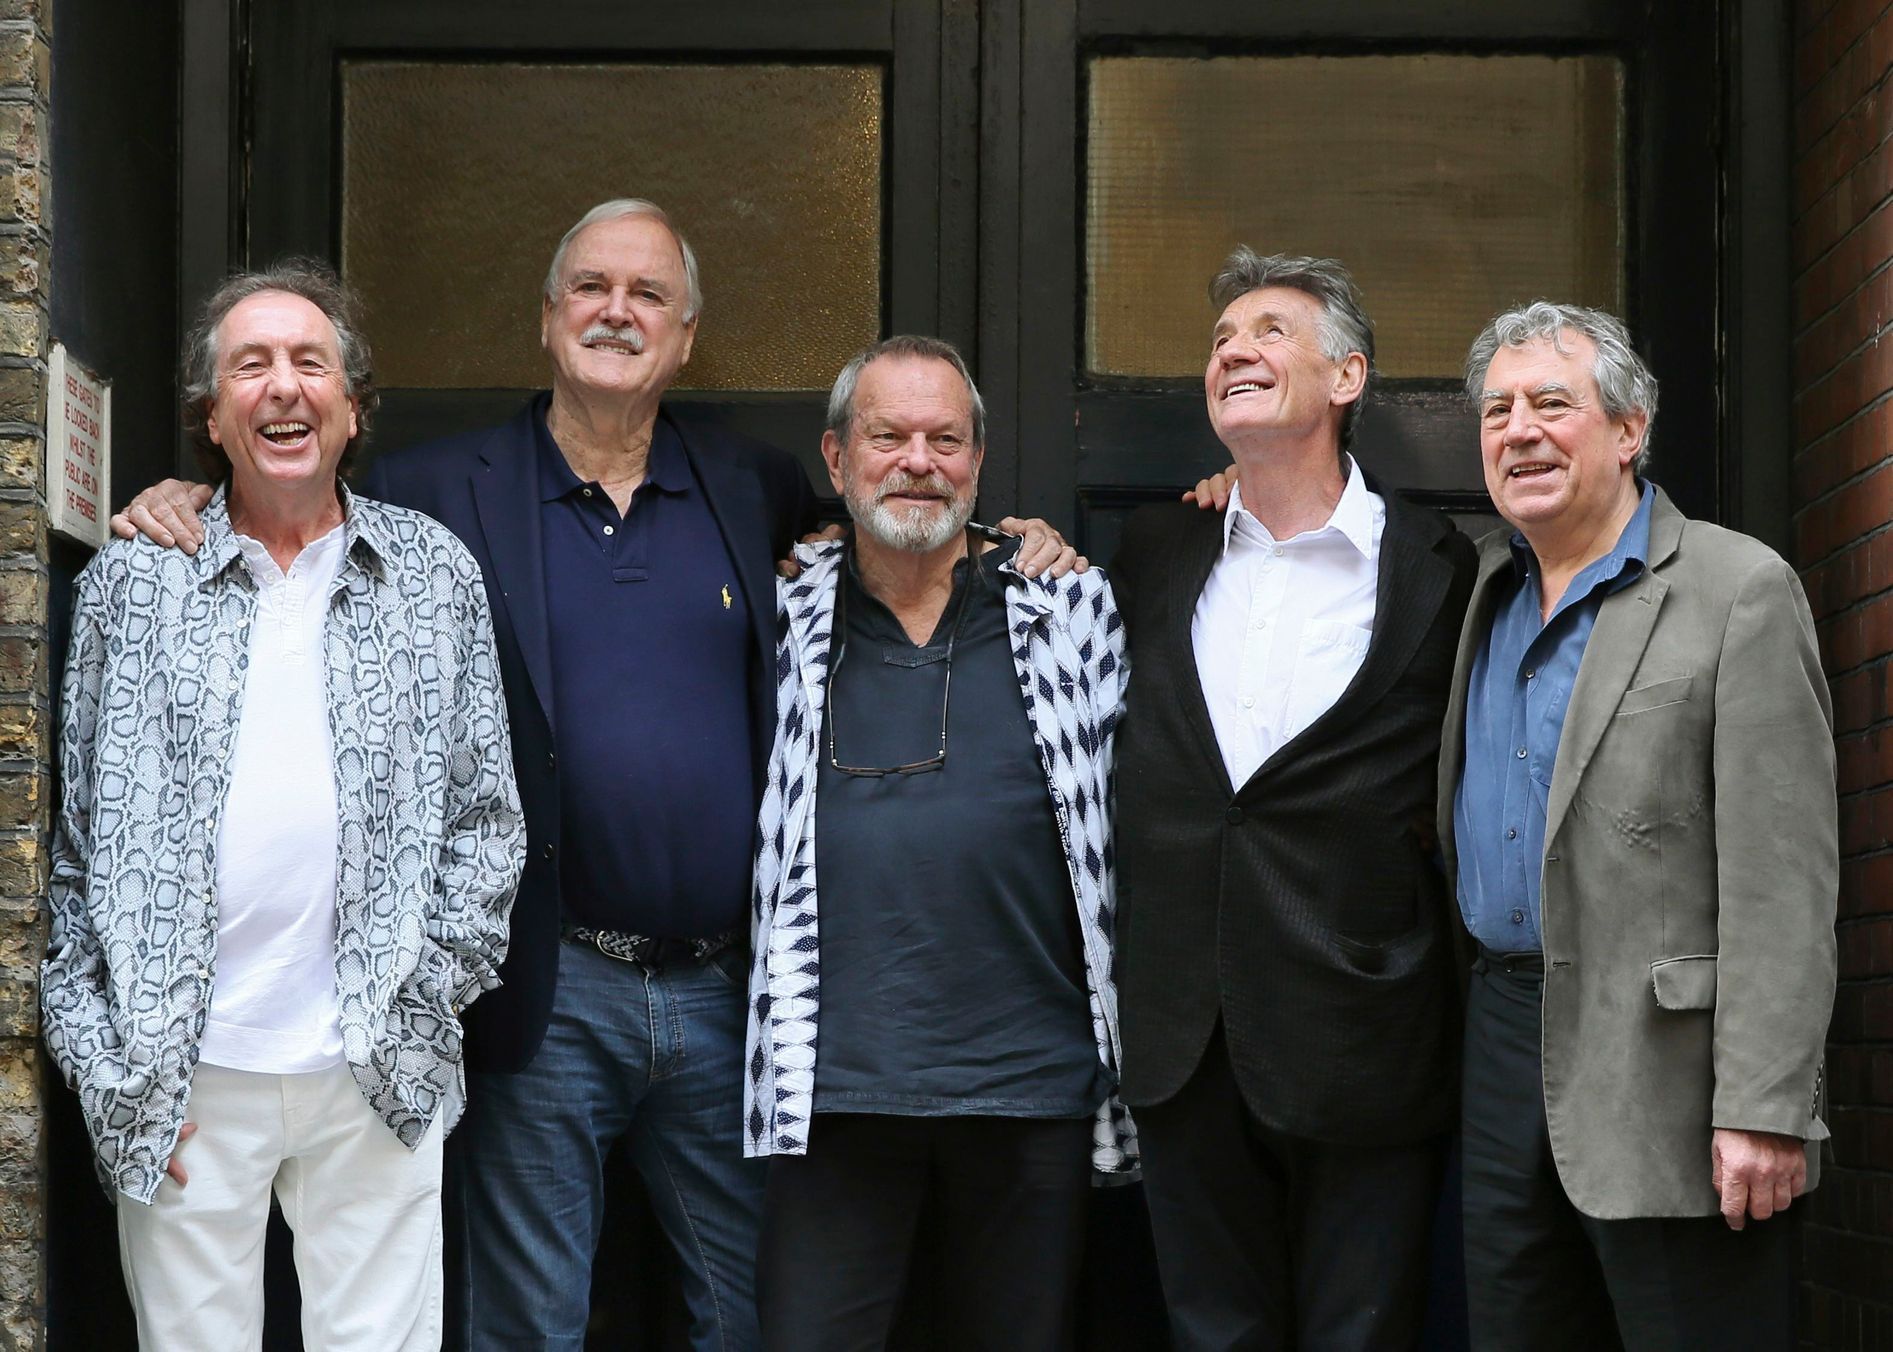 Members of British comedy troupe Monty Python pose for a photograph during a media event in central London